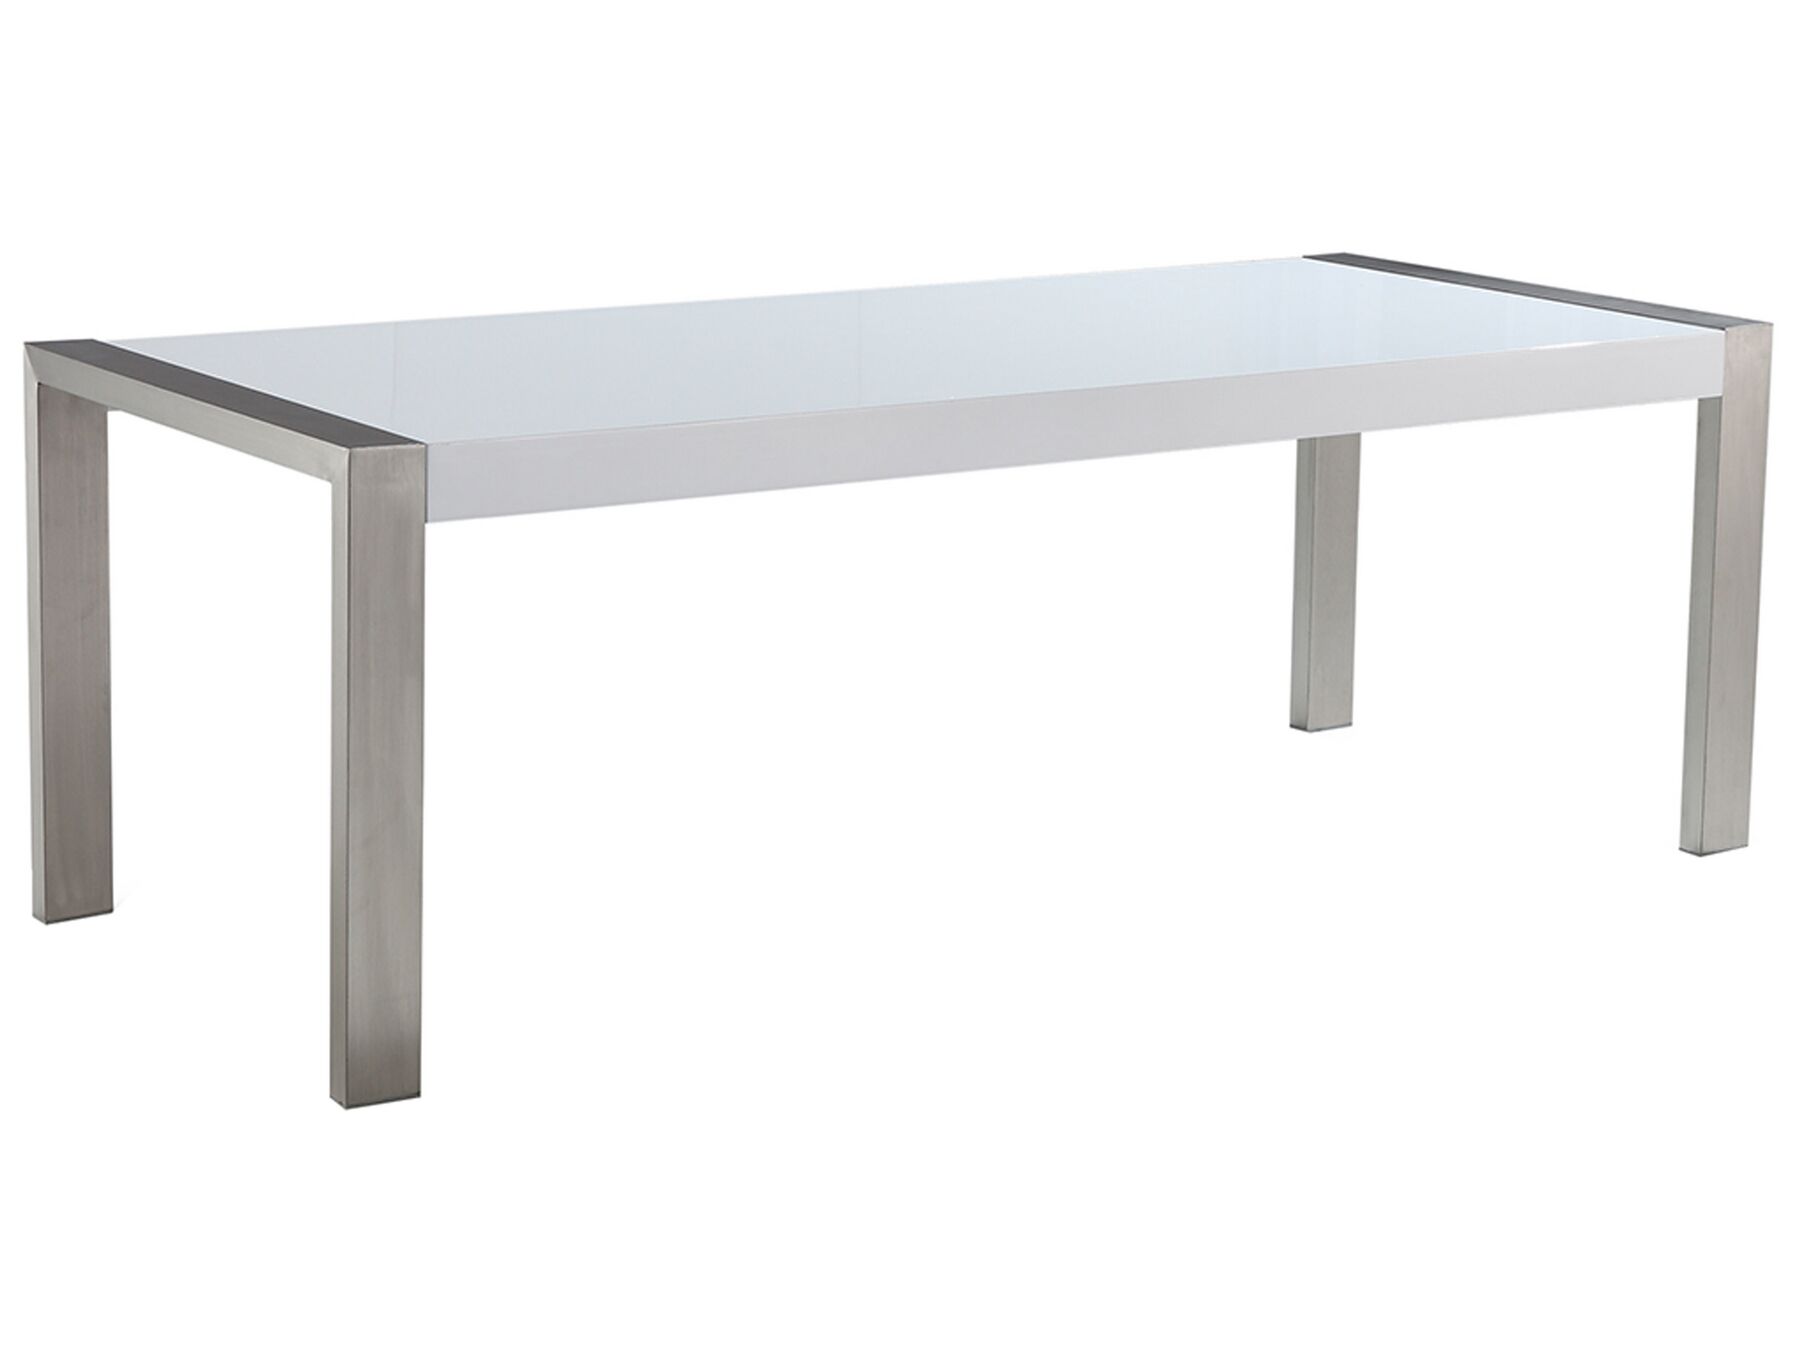 Modern Dining Table for 8 People White with Grey Brushed Stainless Steel Arctic